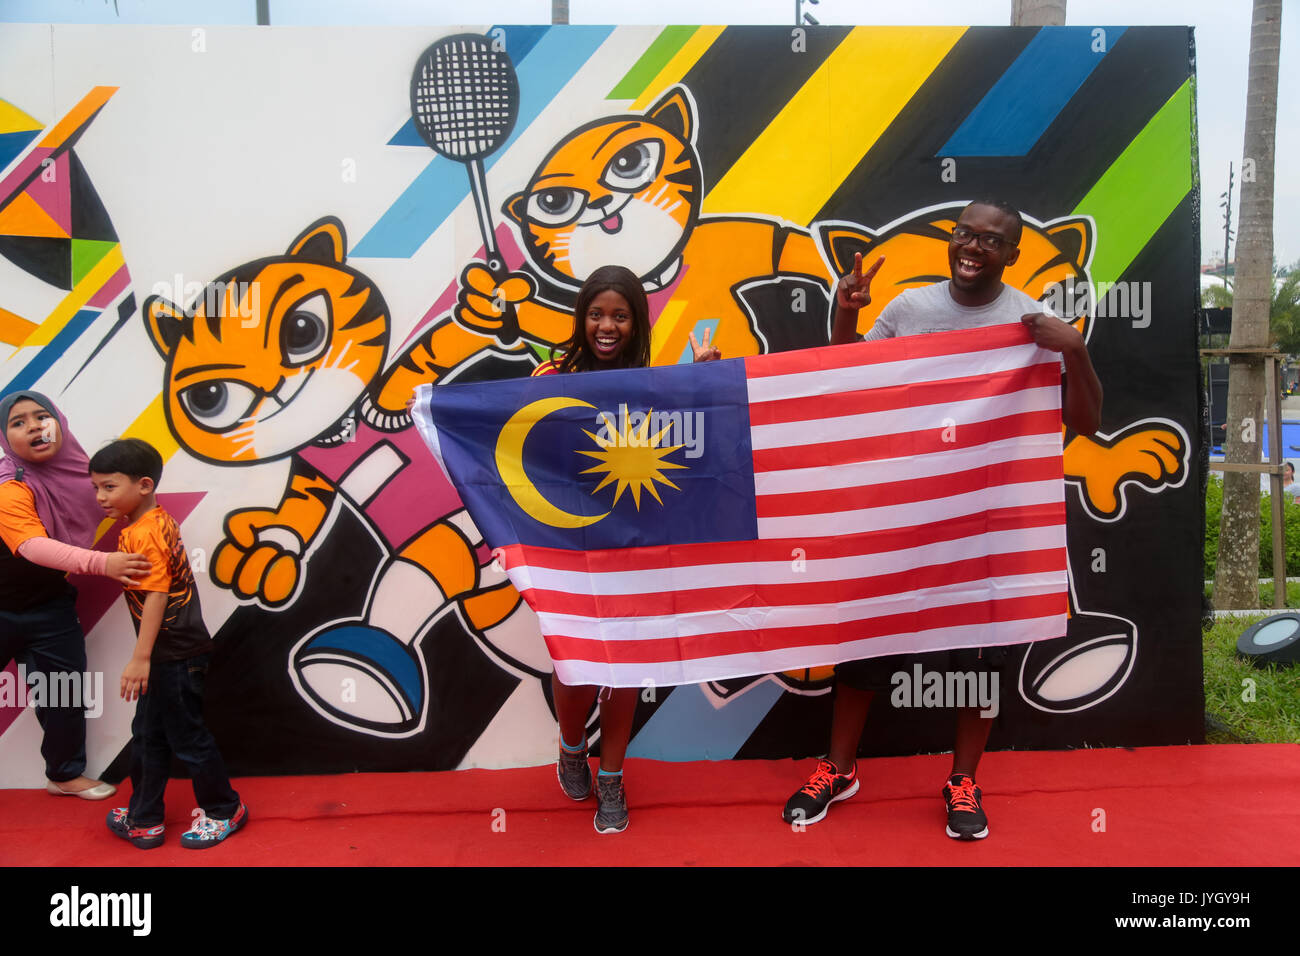 Foreigners taking picture with the official SEA games signboard during opening ceremony of the 29th SEA games. Credit: Calvin Chan/Alamy Live News Stock Photo